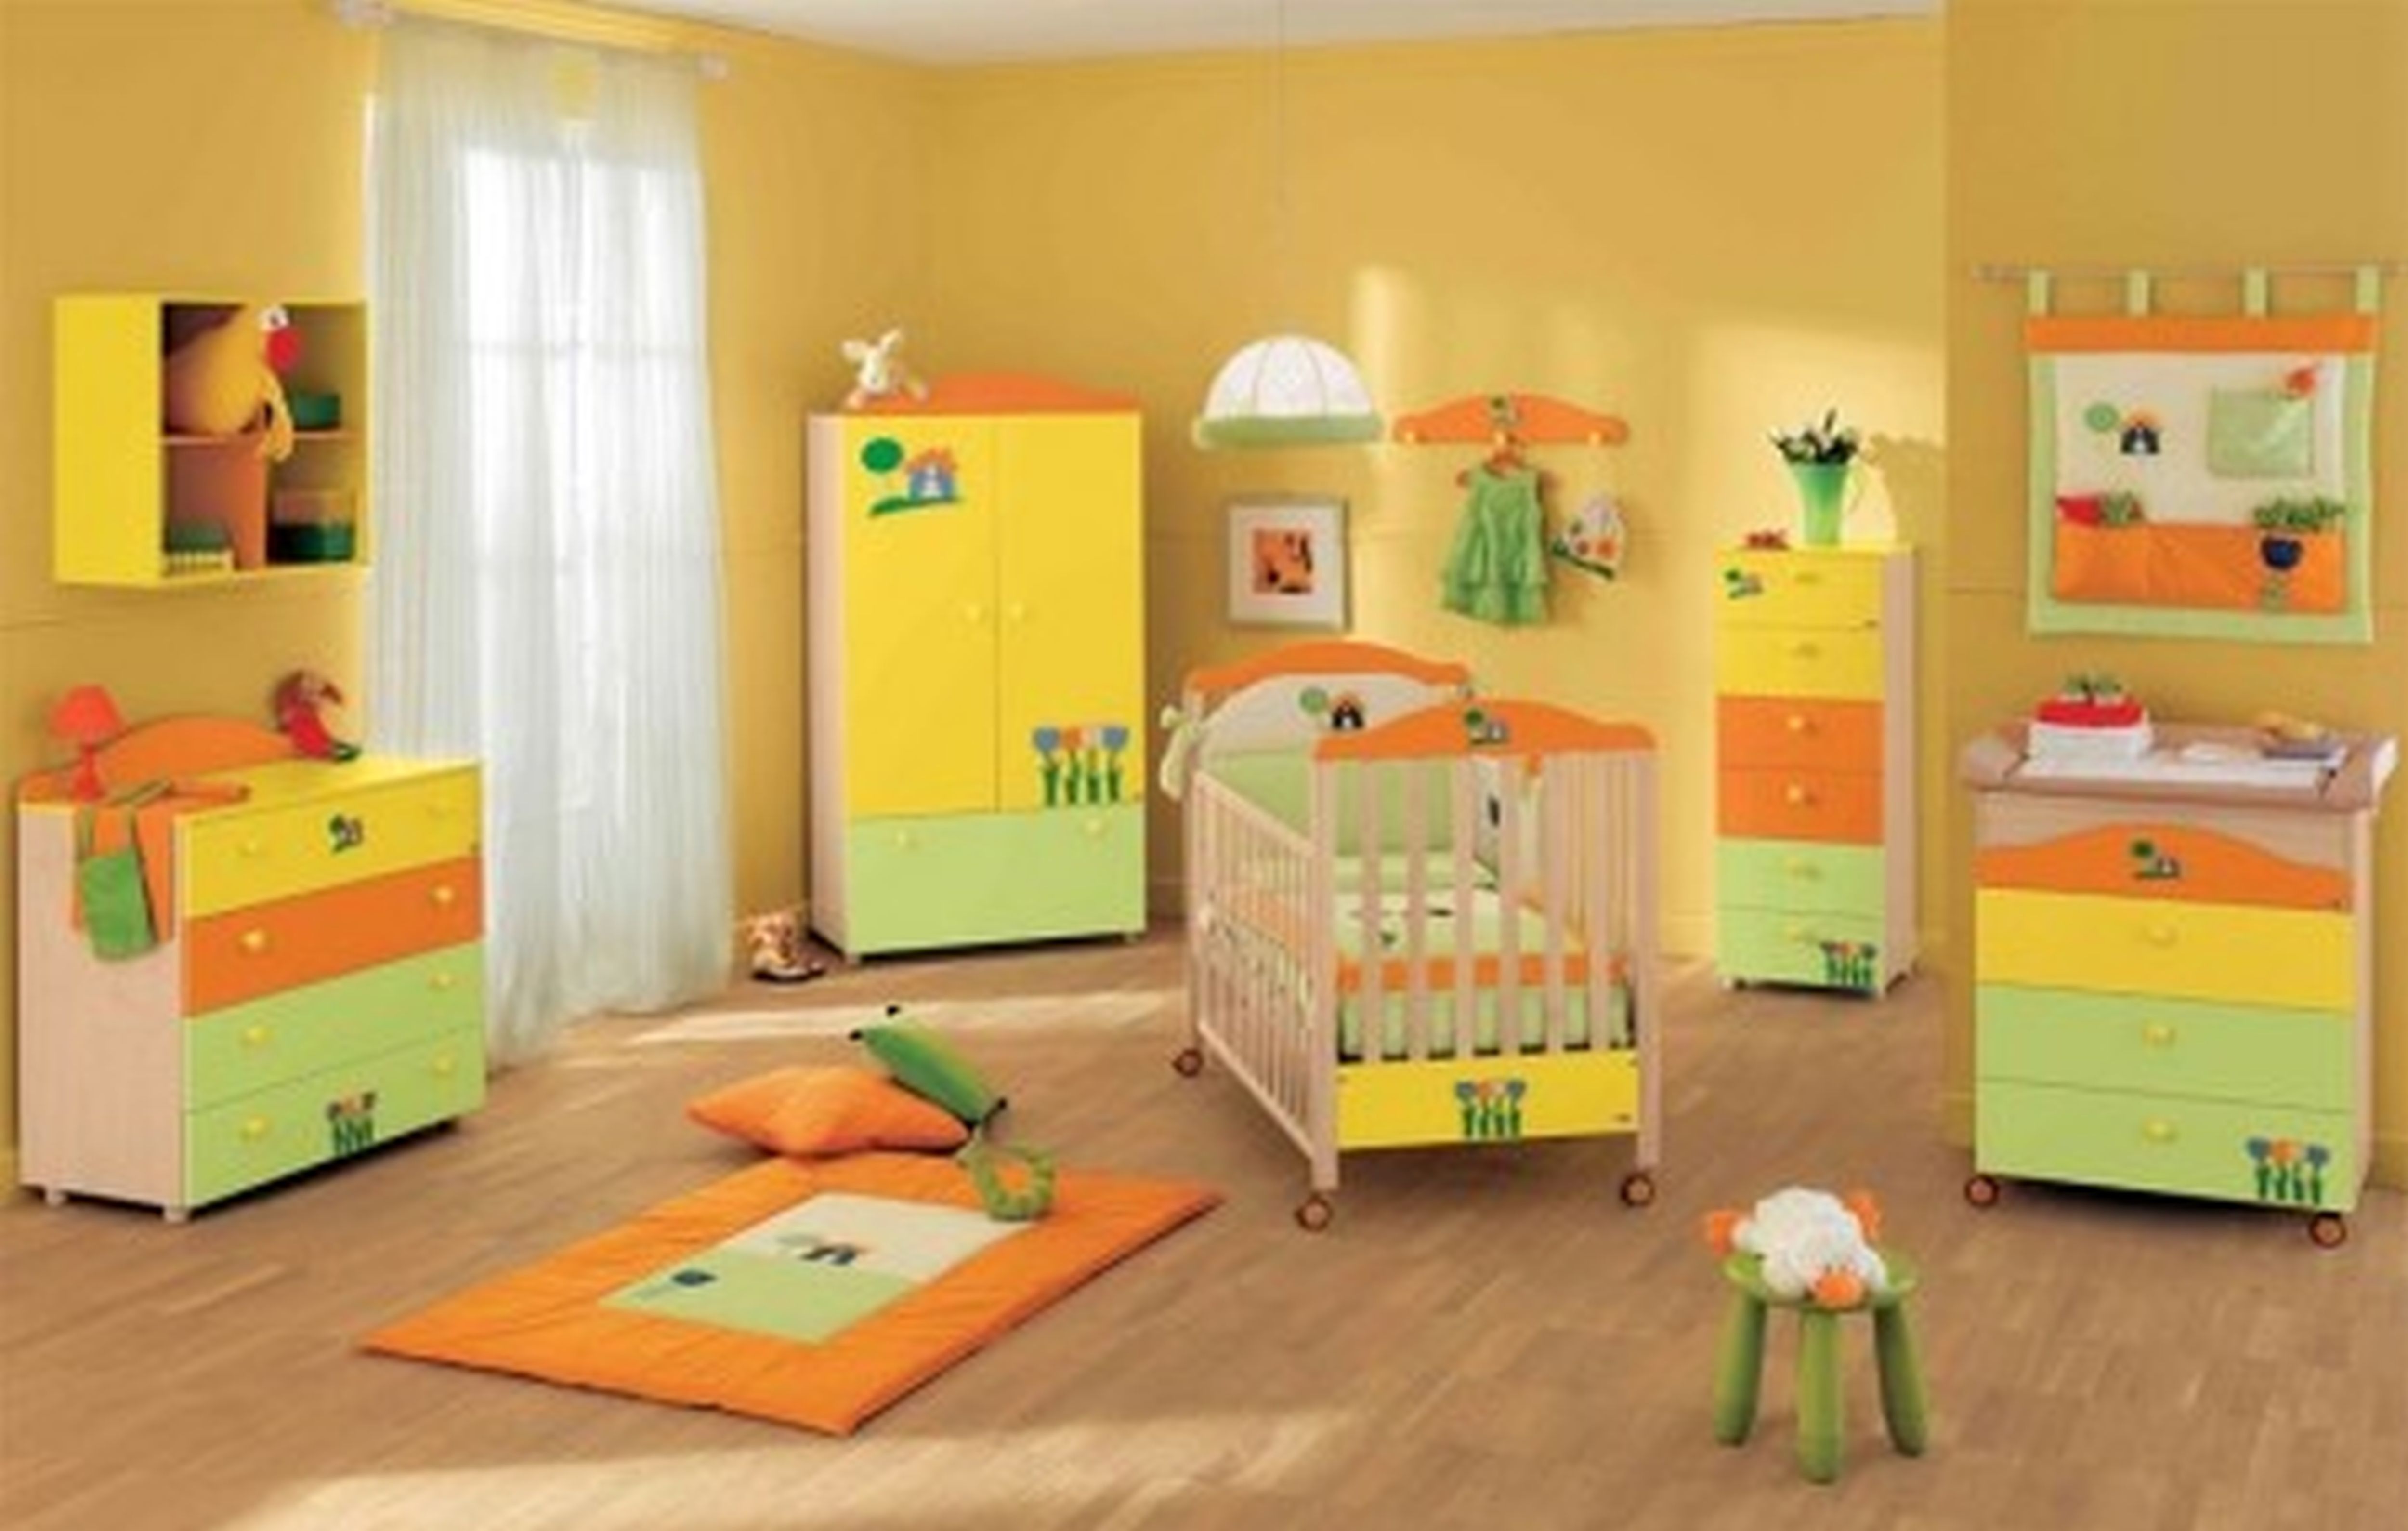 interior-kids-room-furniture-exclusive-brilliant-nursery-room-plan-design-ideas-together-with-colorful-baby-furniture-collection-decor-and-adorable-yellow-wall-paint-concept-designs-with-decorating-i